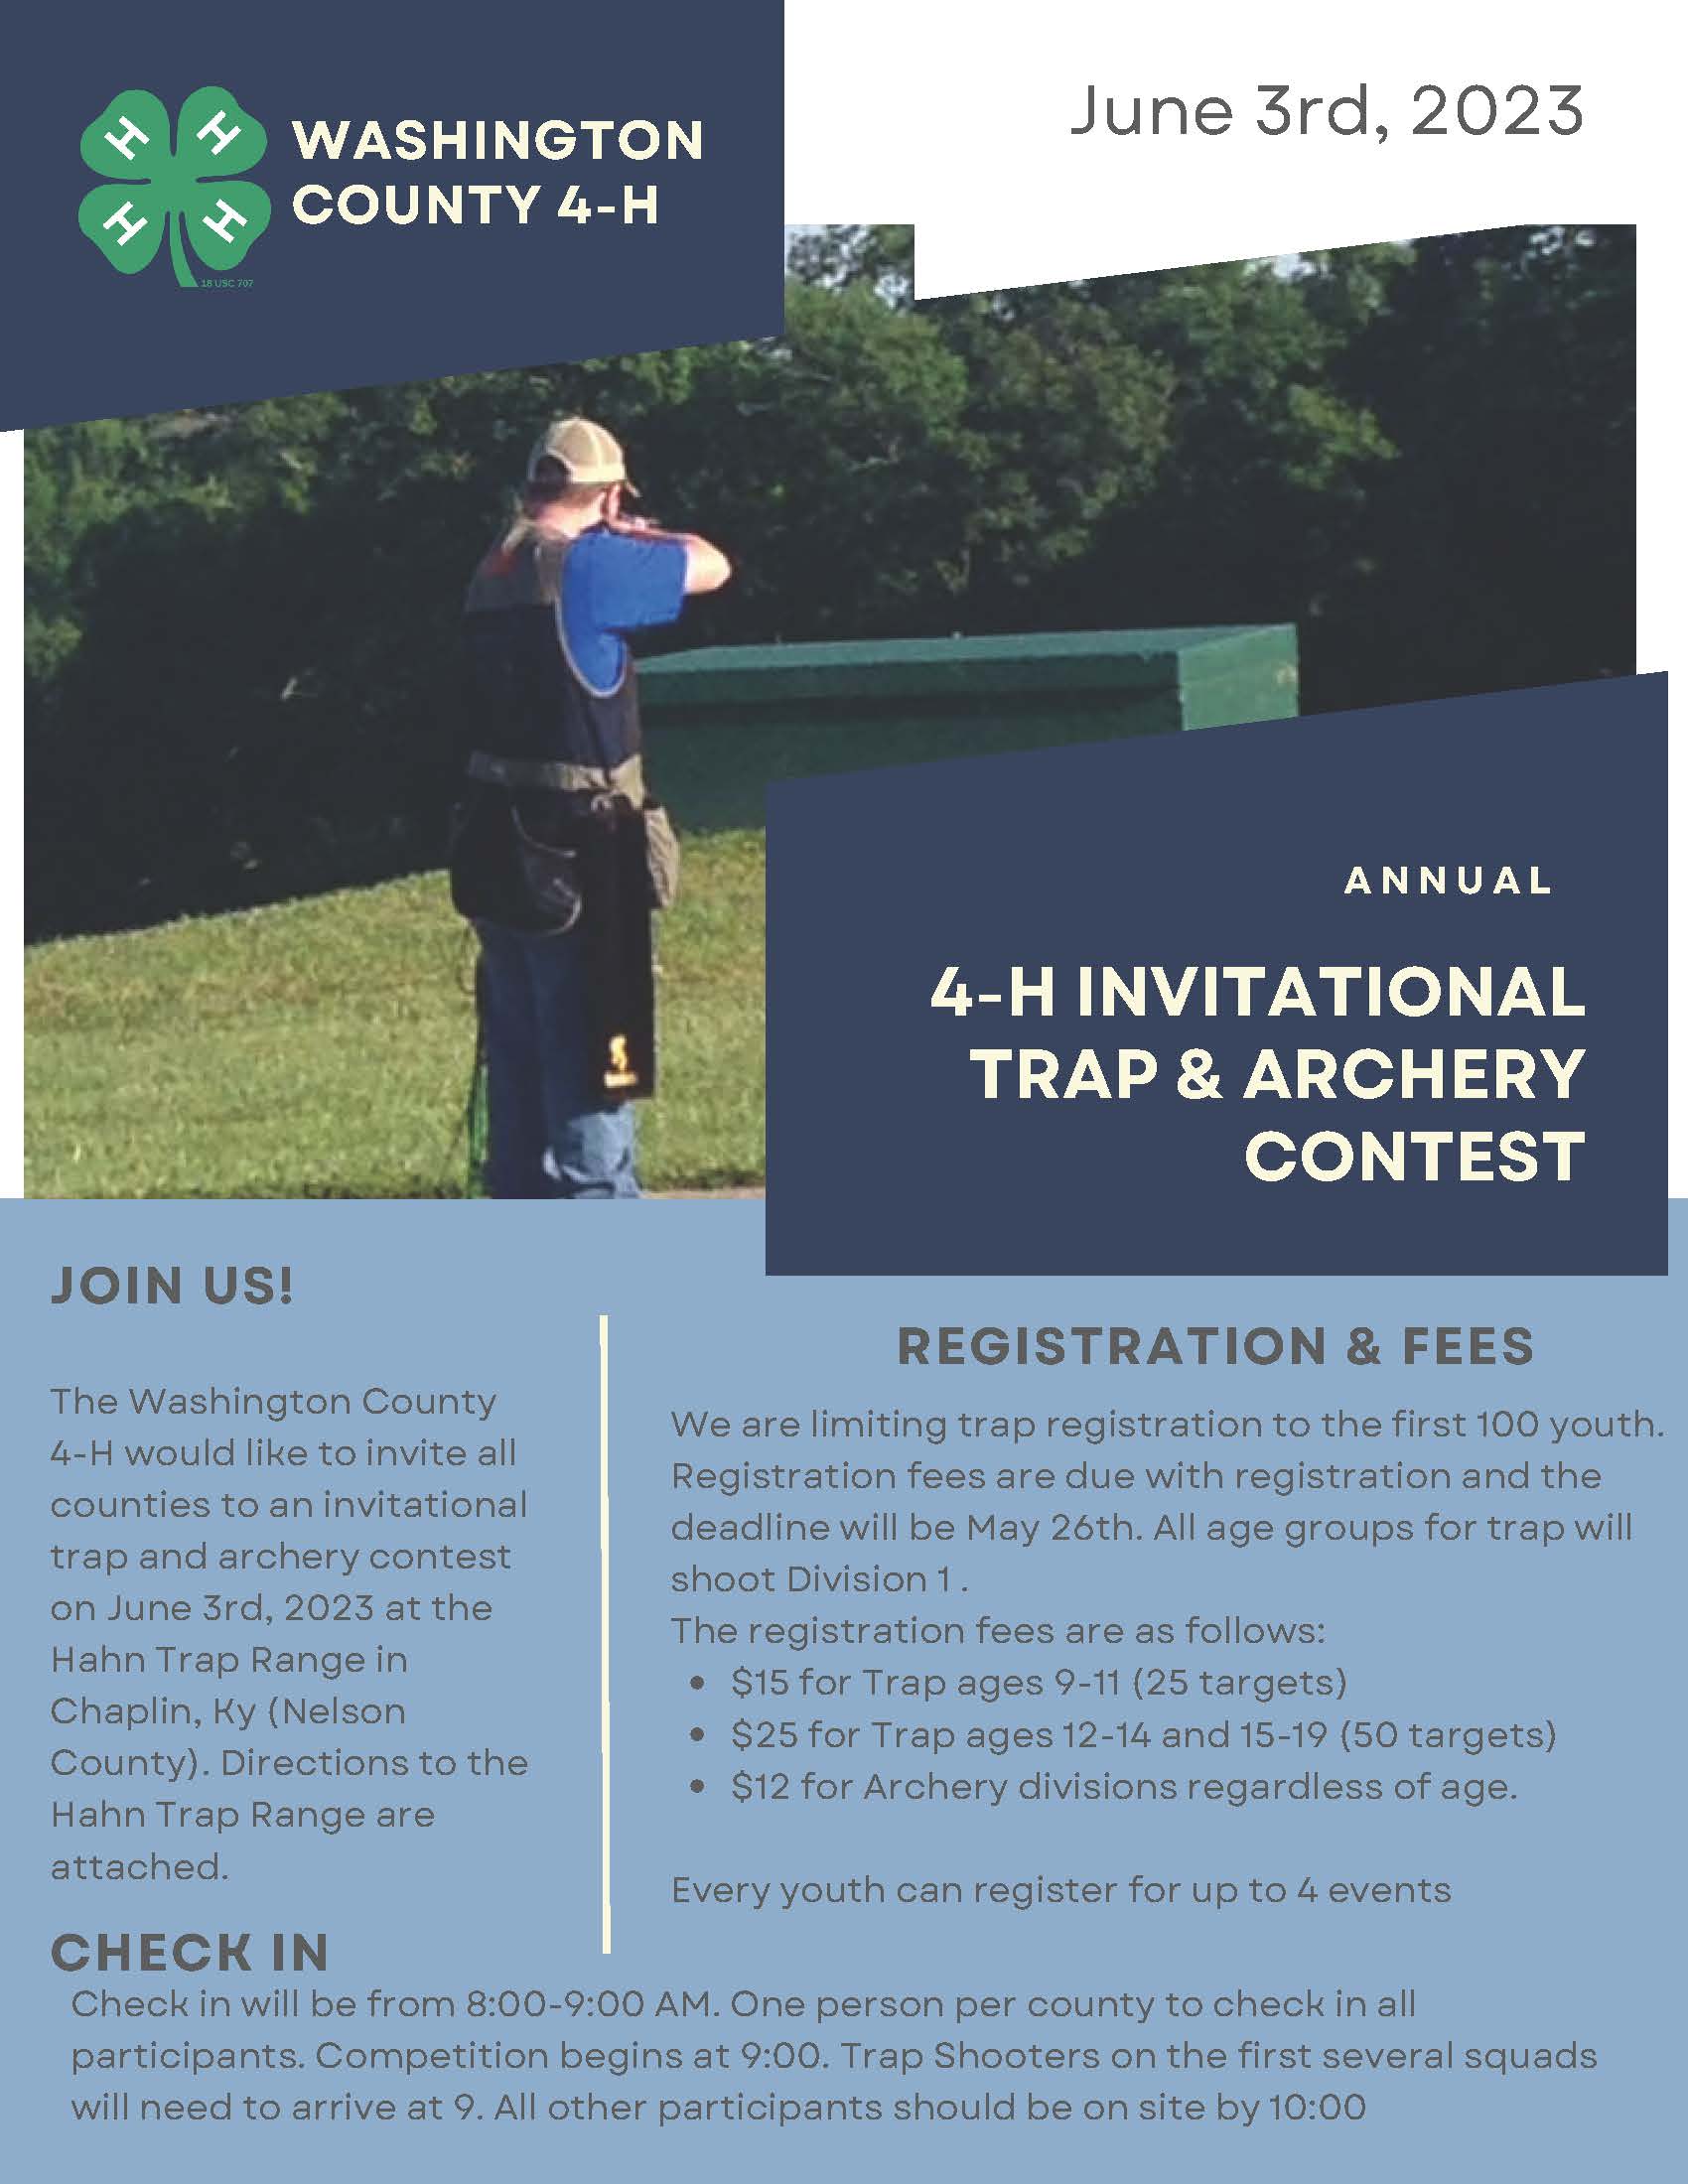 Join us at our 4-H Invitational Trap and Archery Tournament Contest!